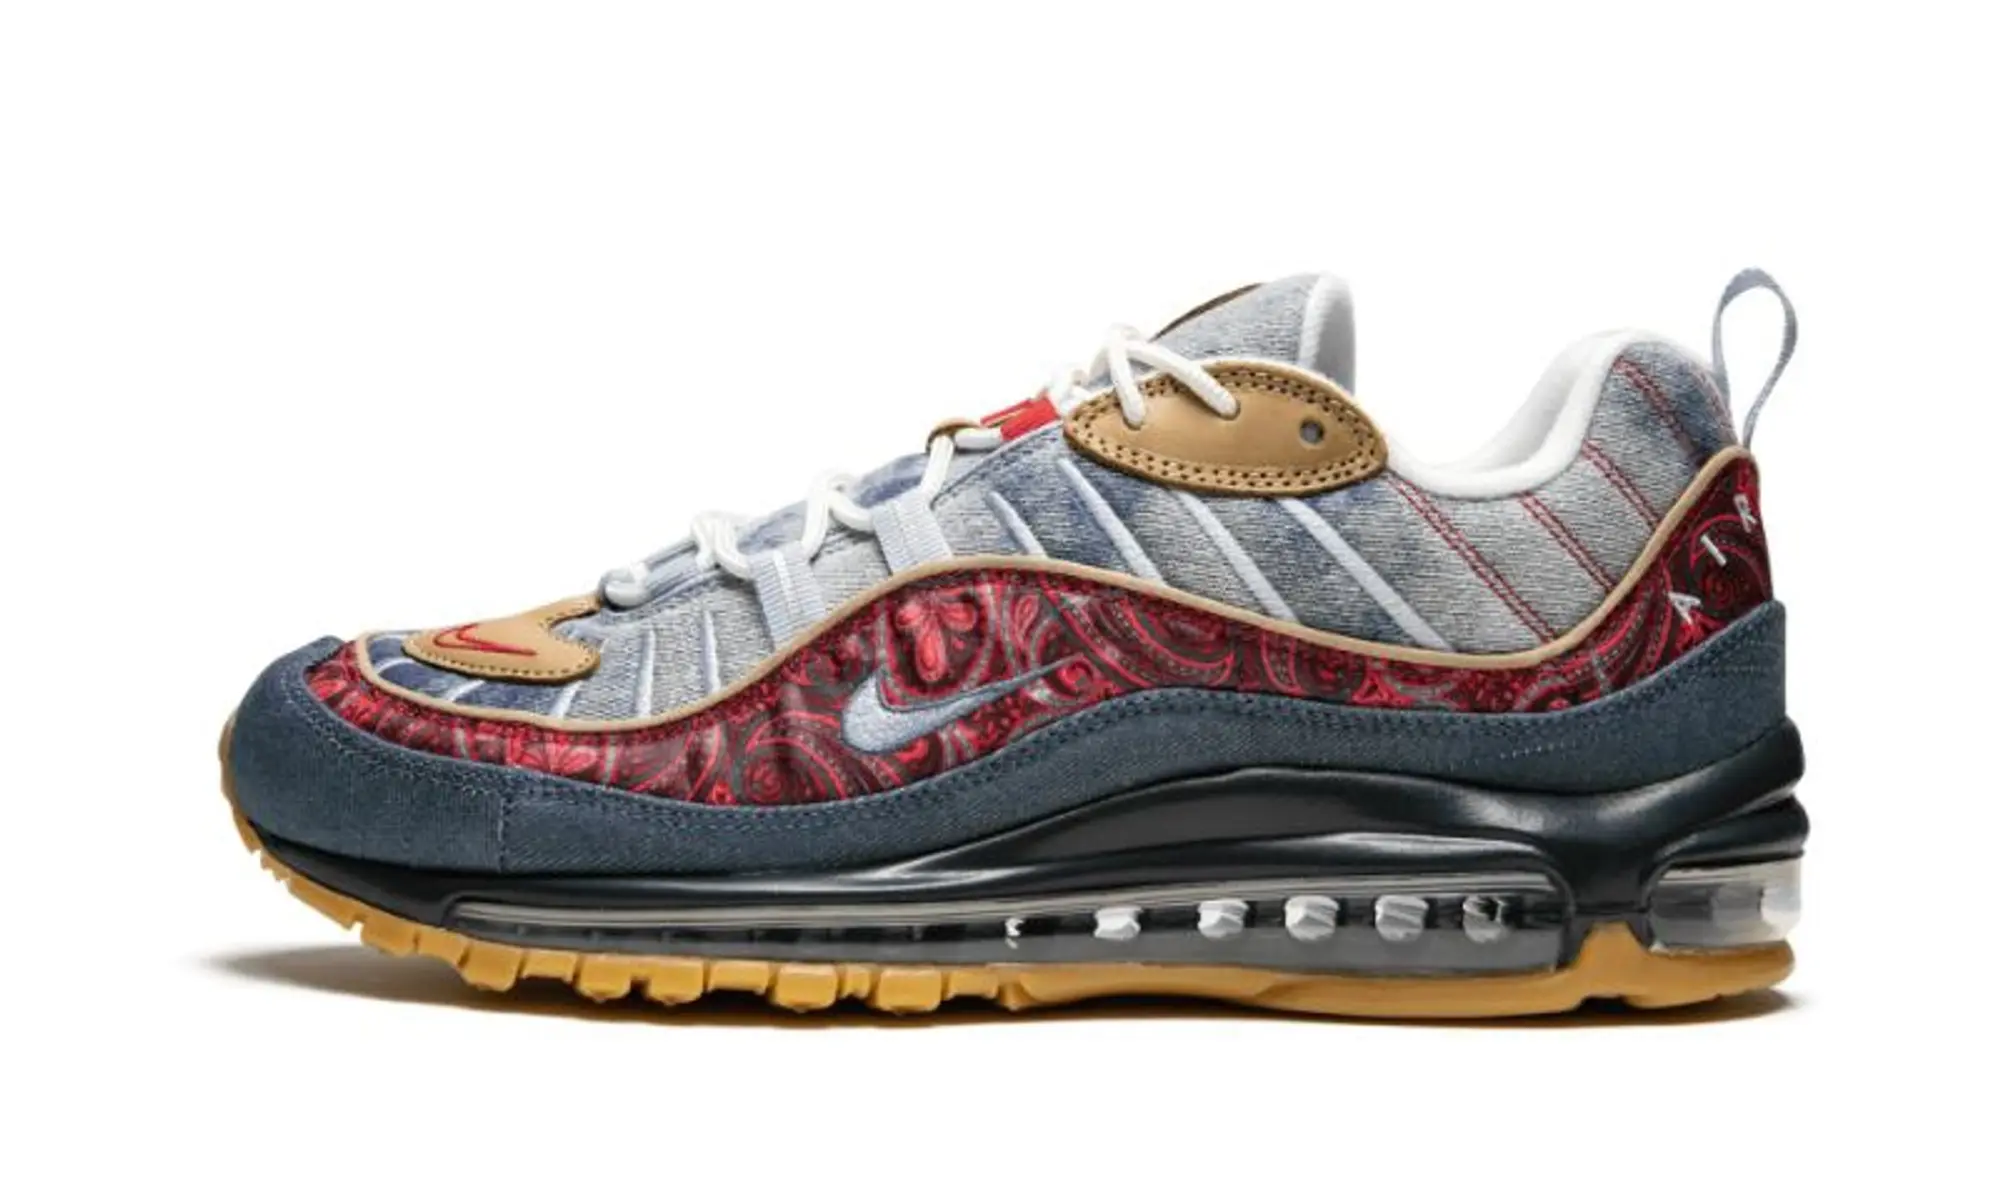 Nike Air Max 98 Wild West Shoes